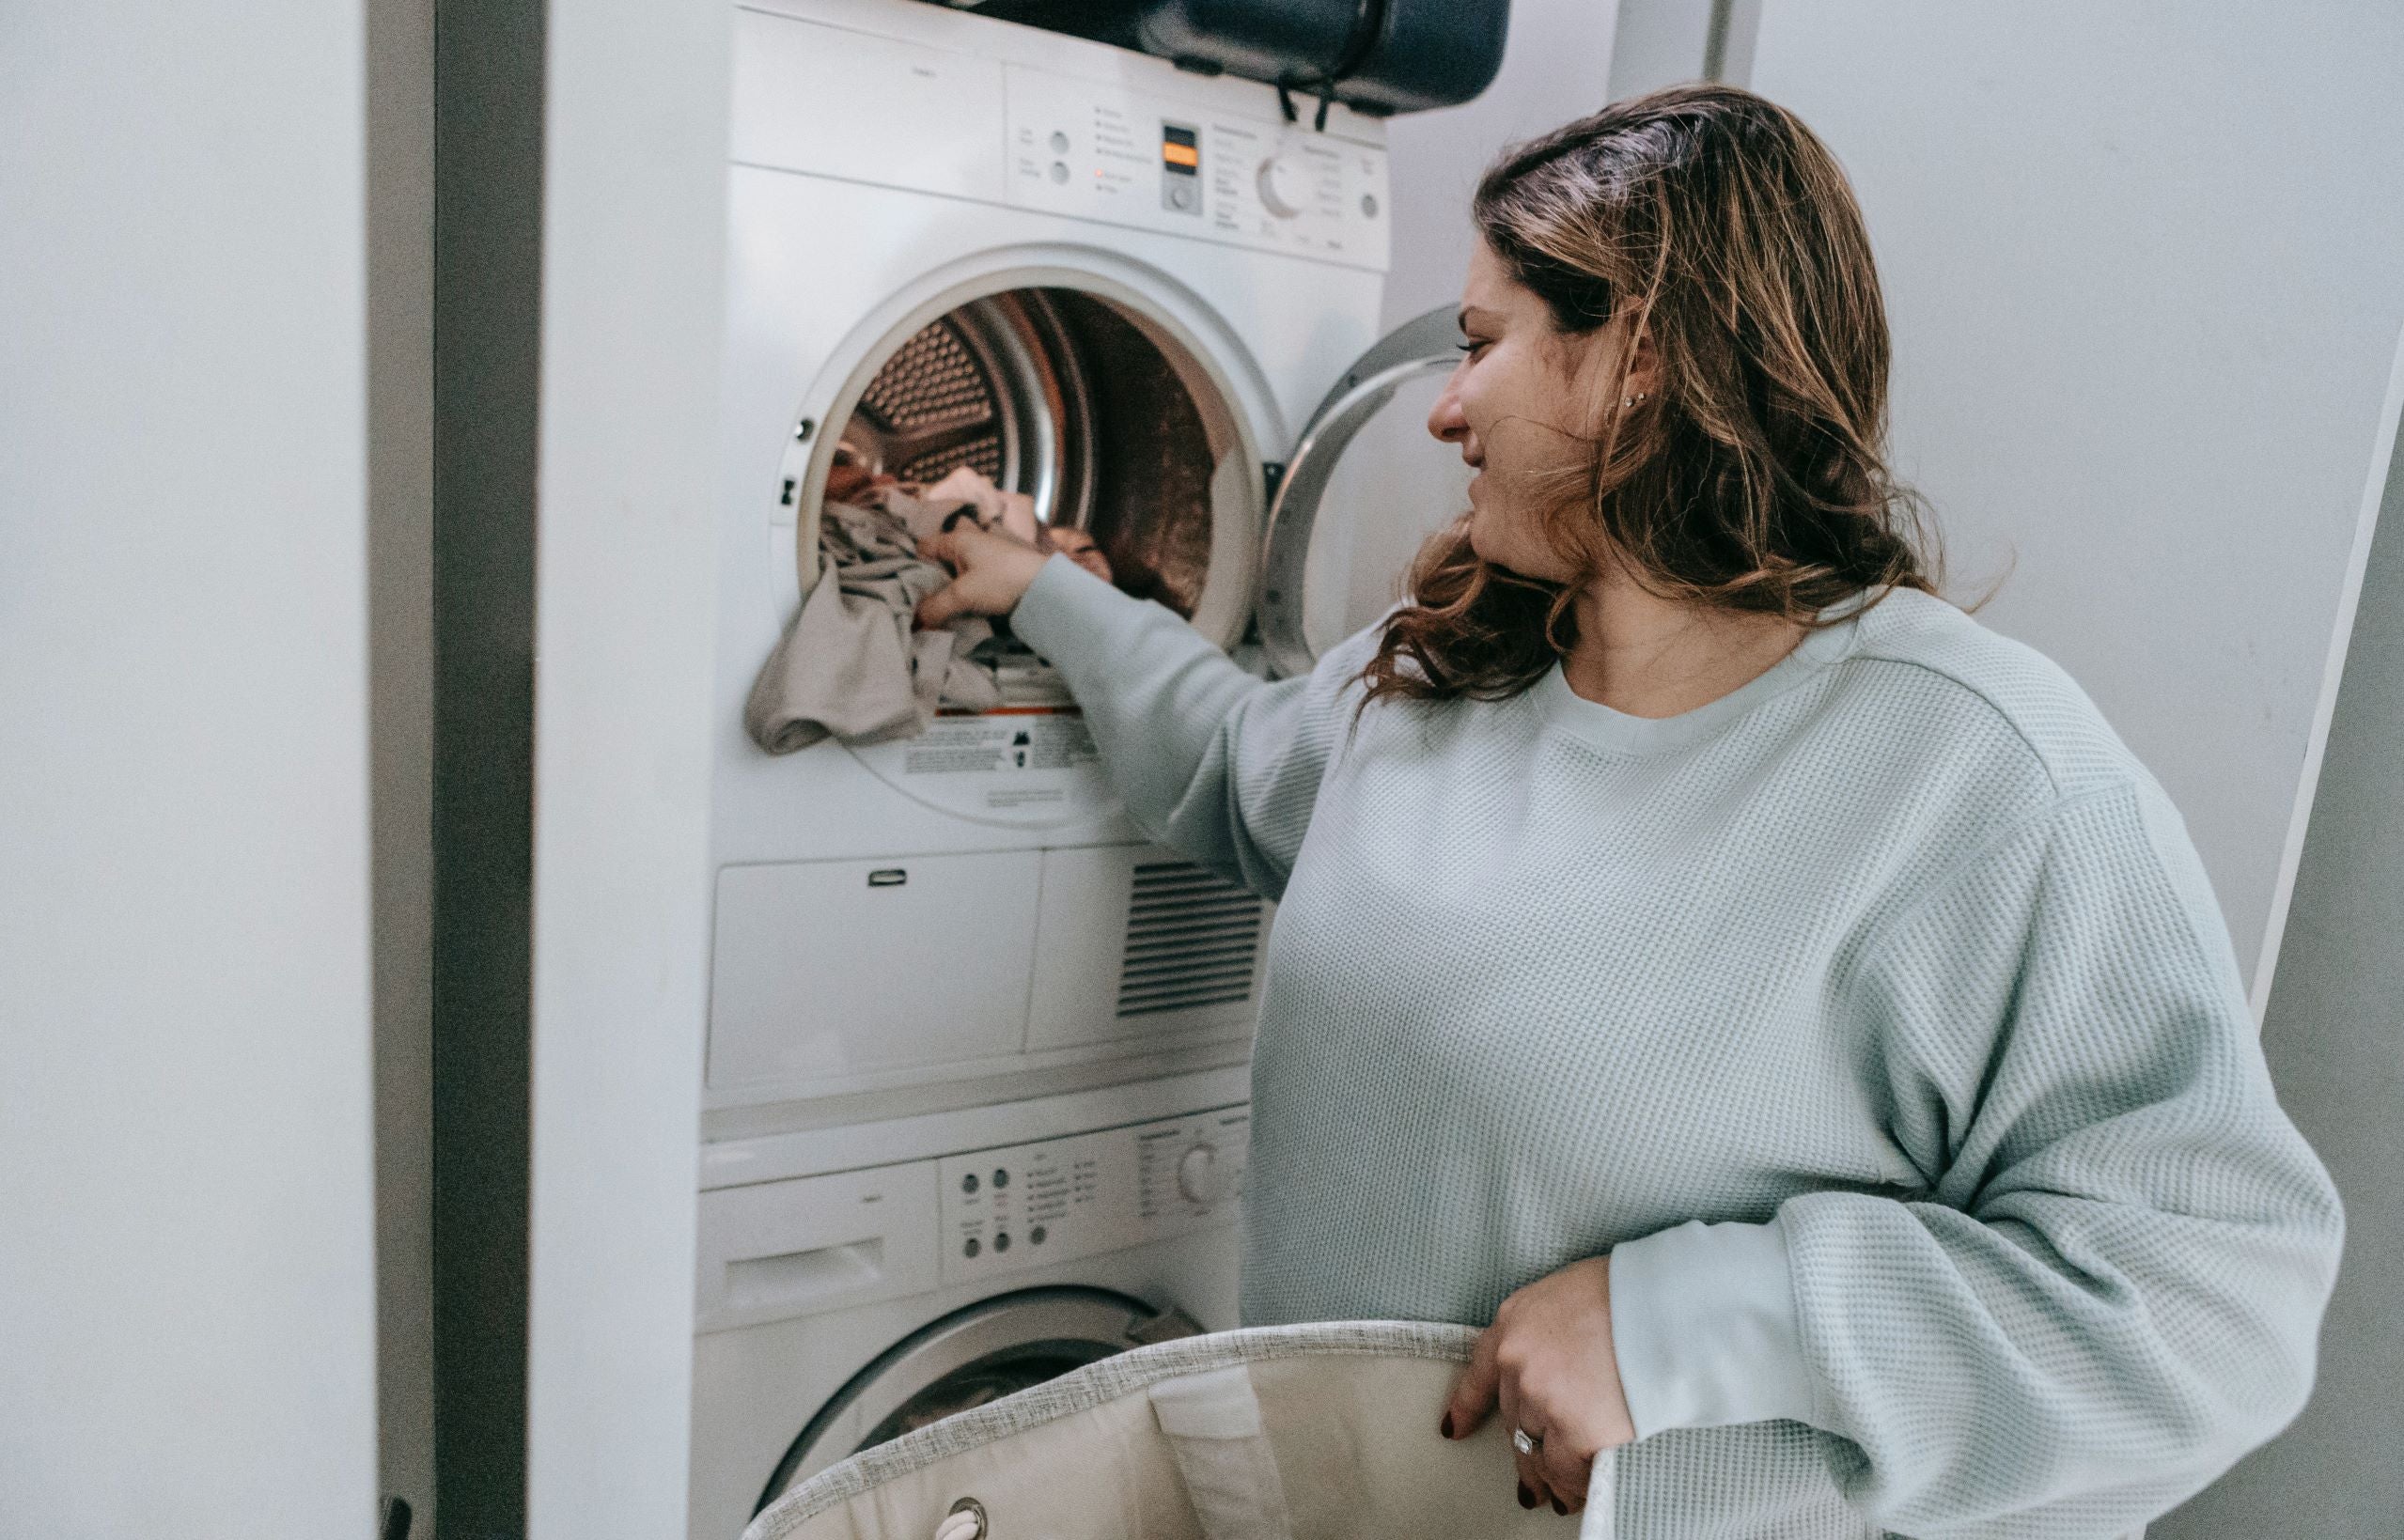 How much should I put in my washing machine?